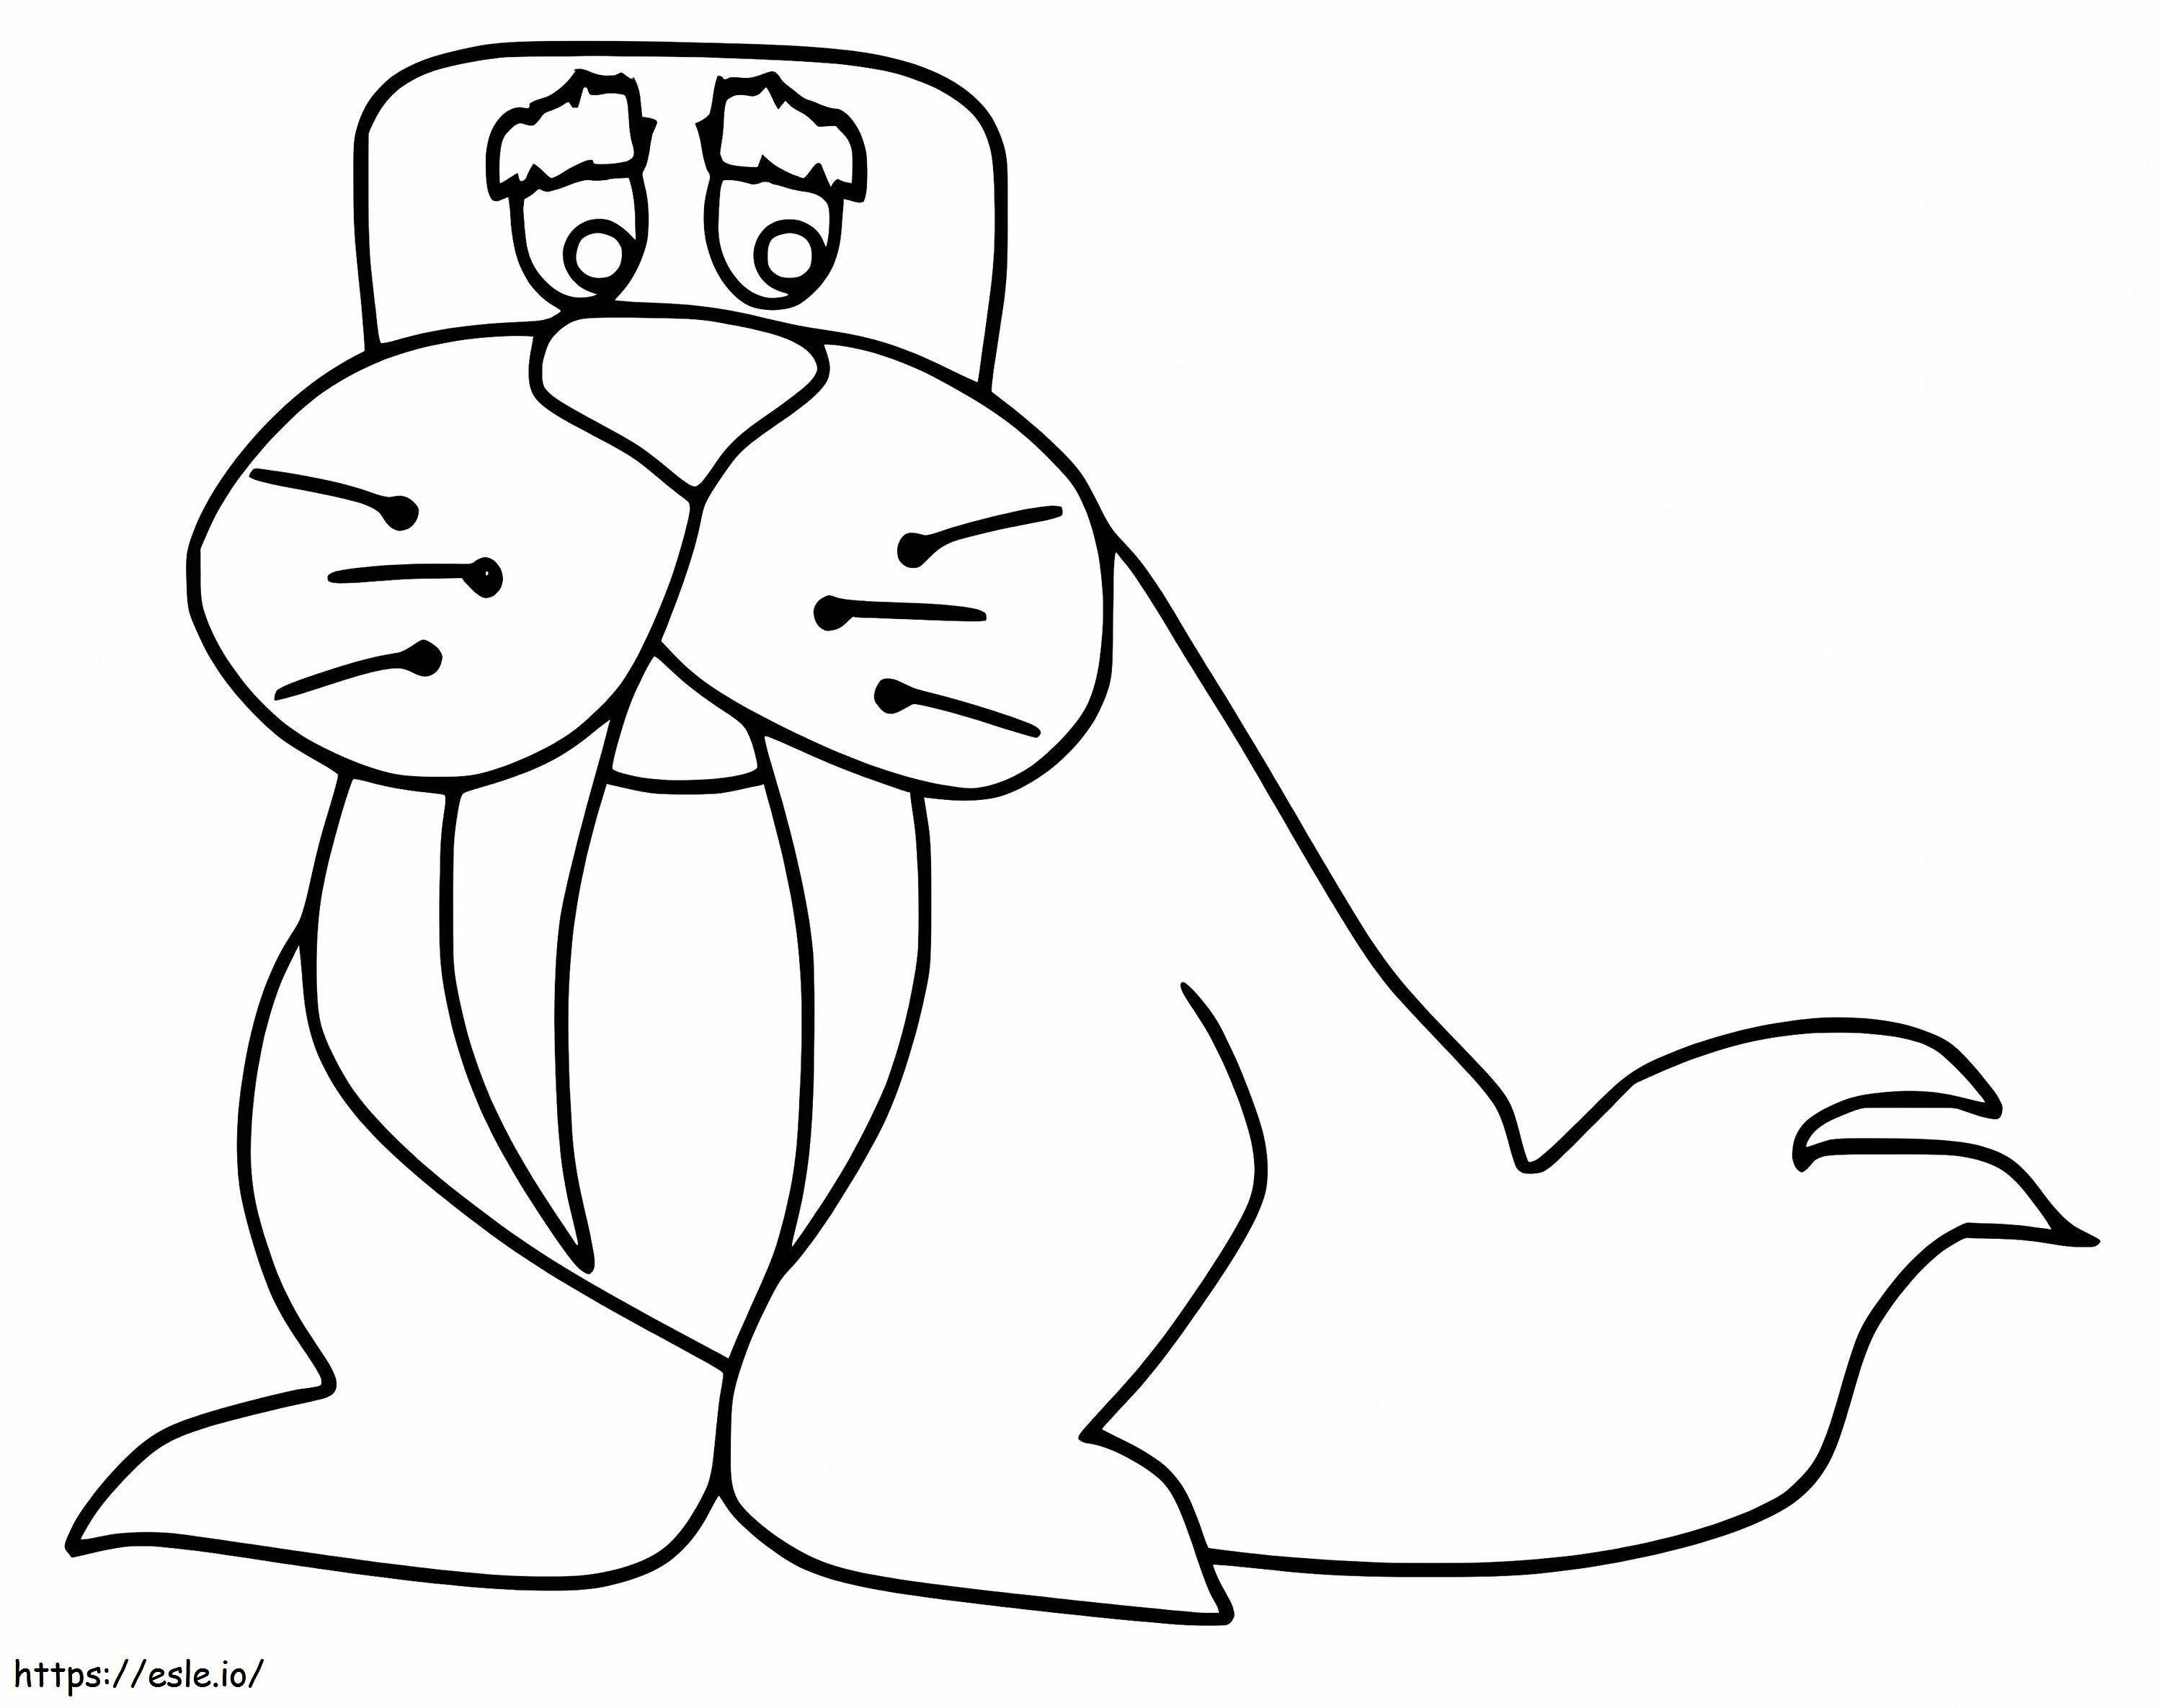 Walrus 11 coloring page